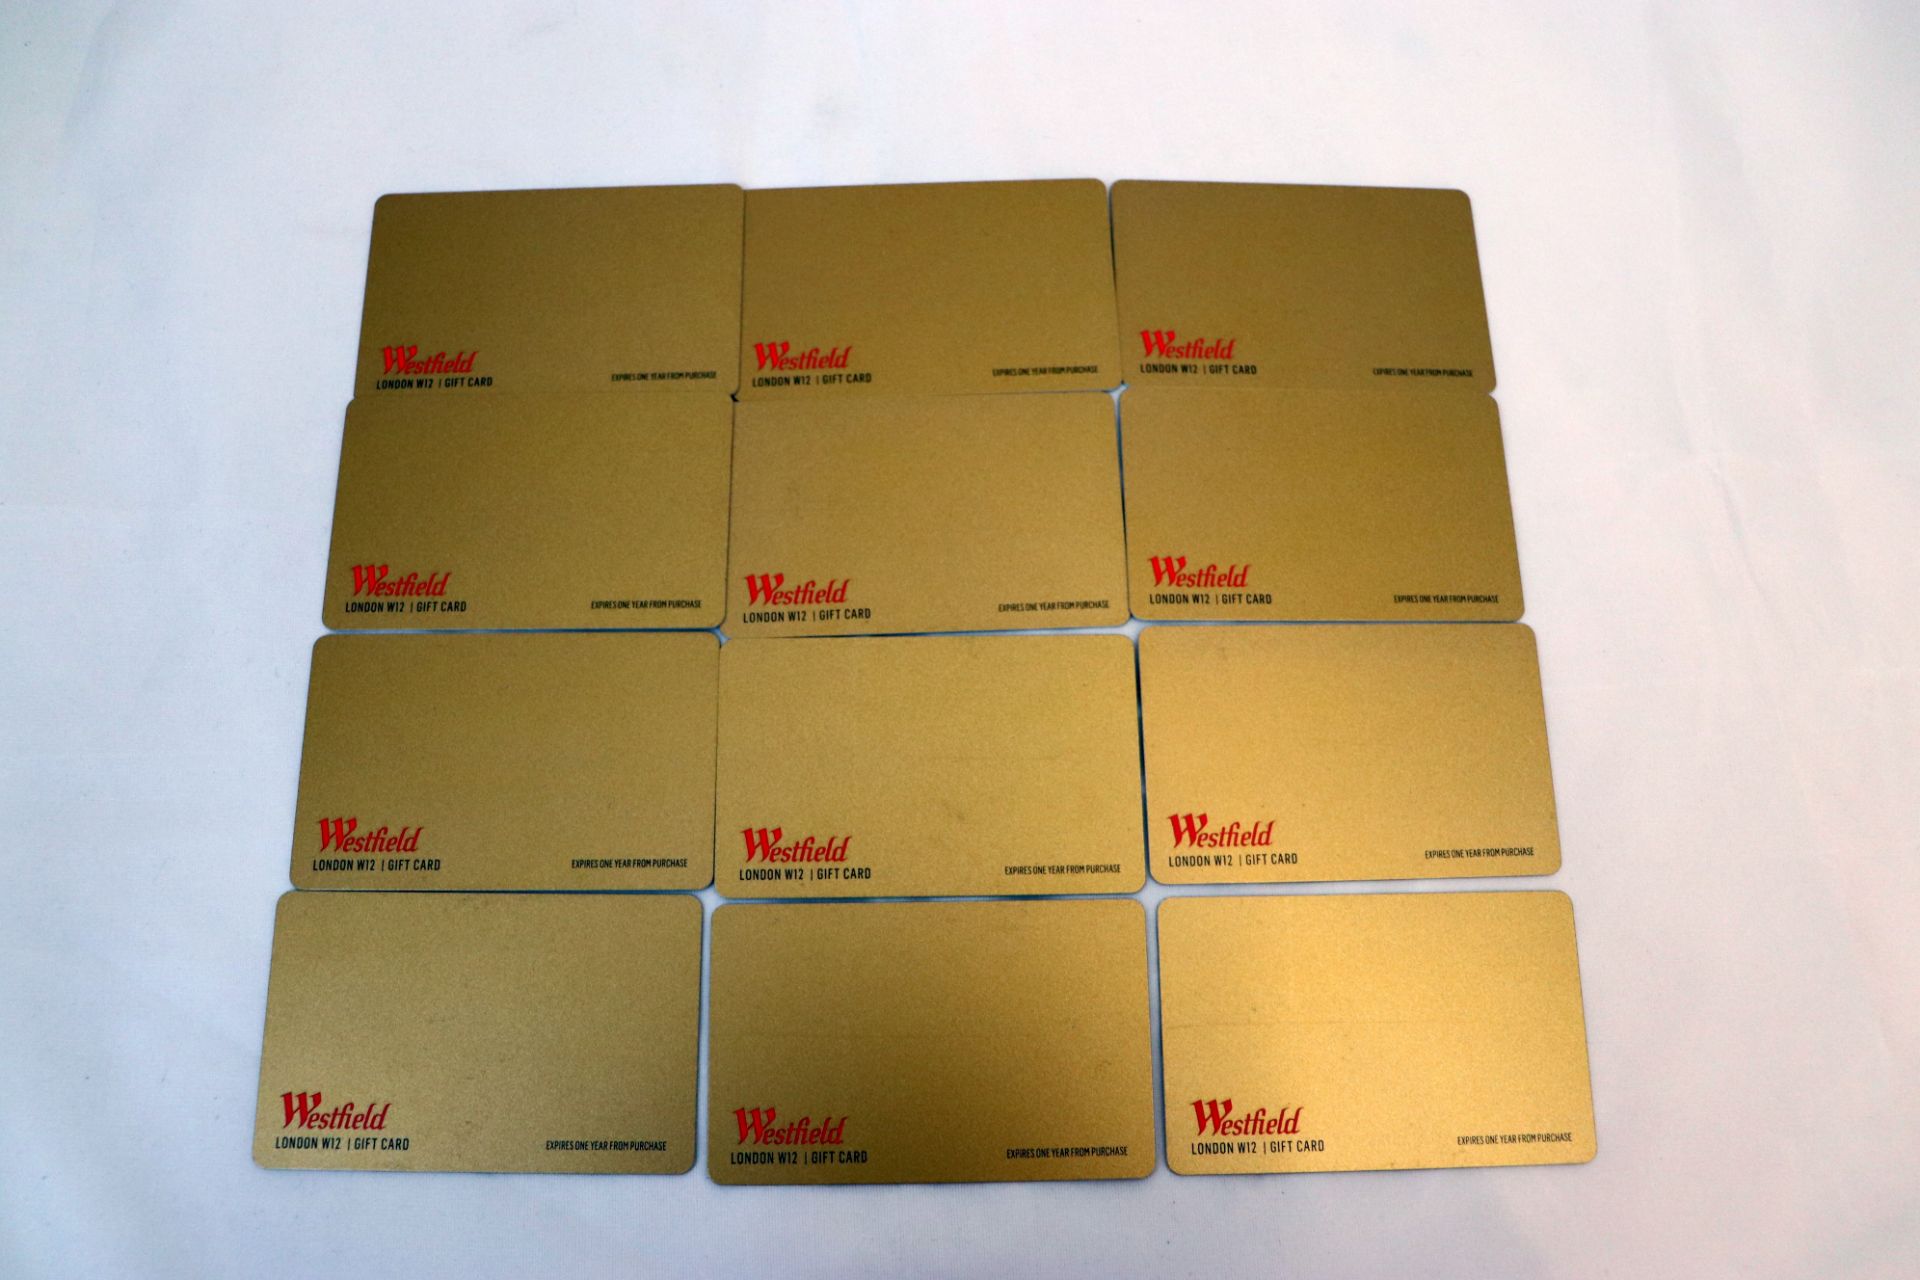 £300 Westfield London Shopping Centre Gift Cards, Expiry Date Believed to be 1st December 2021. (